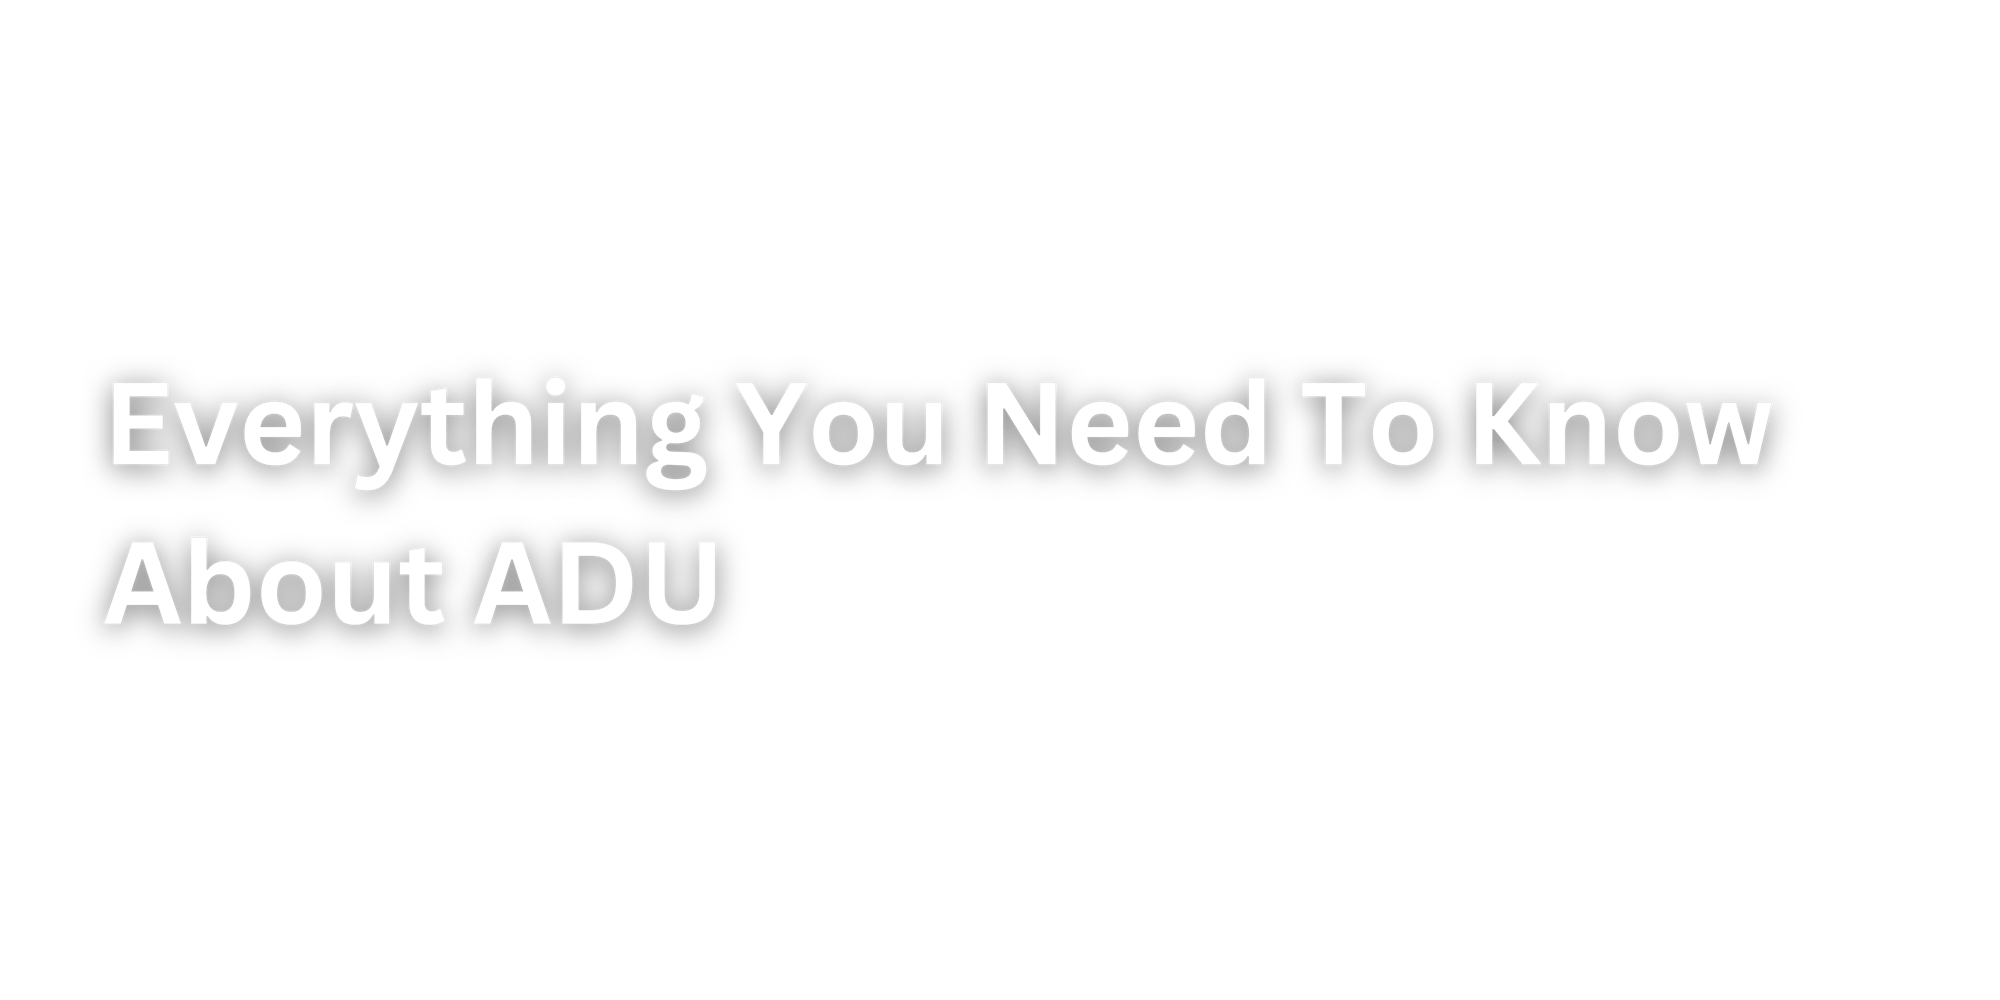 Everything You Need To Know About ADU